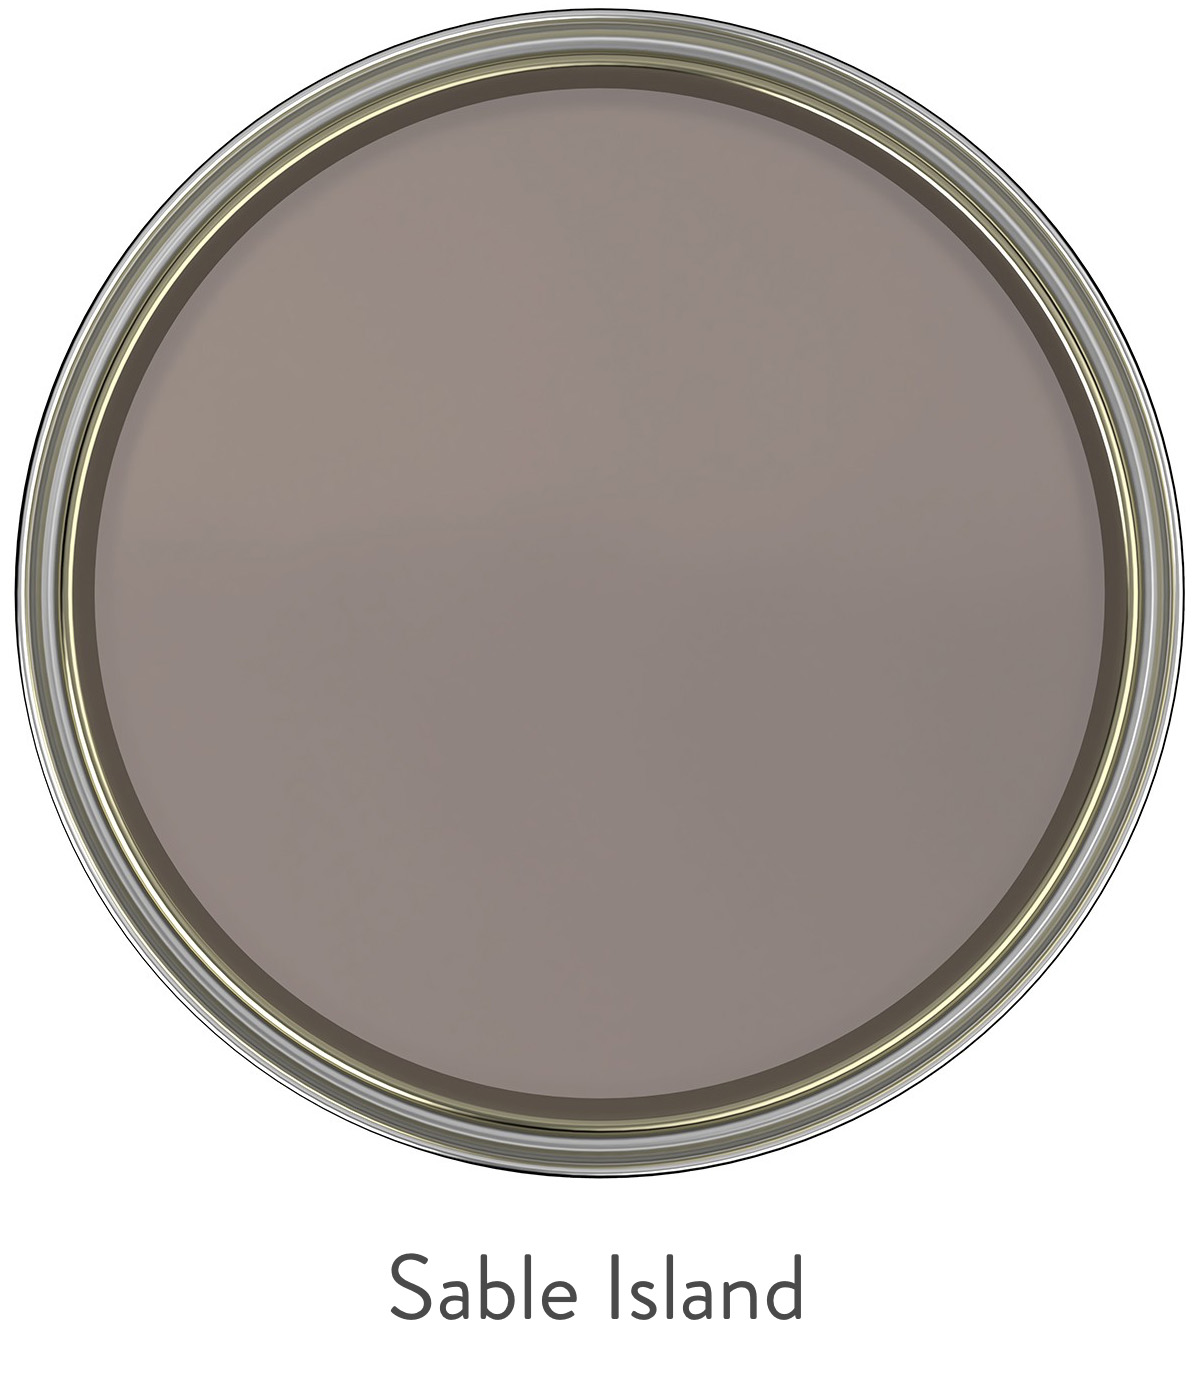 The Pure Edit Sable Island Paint